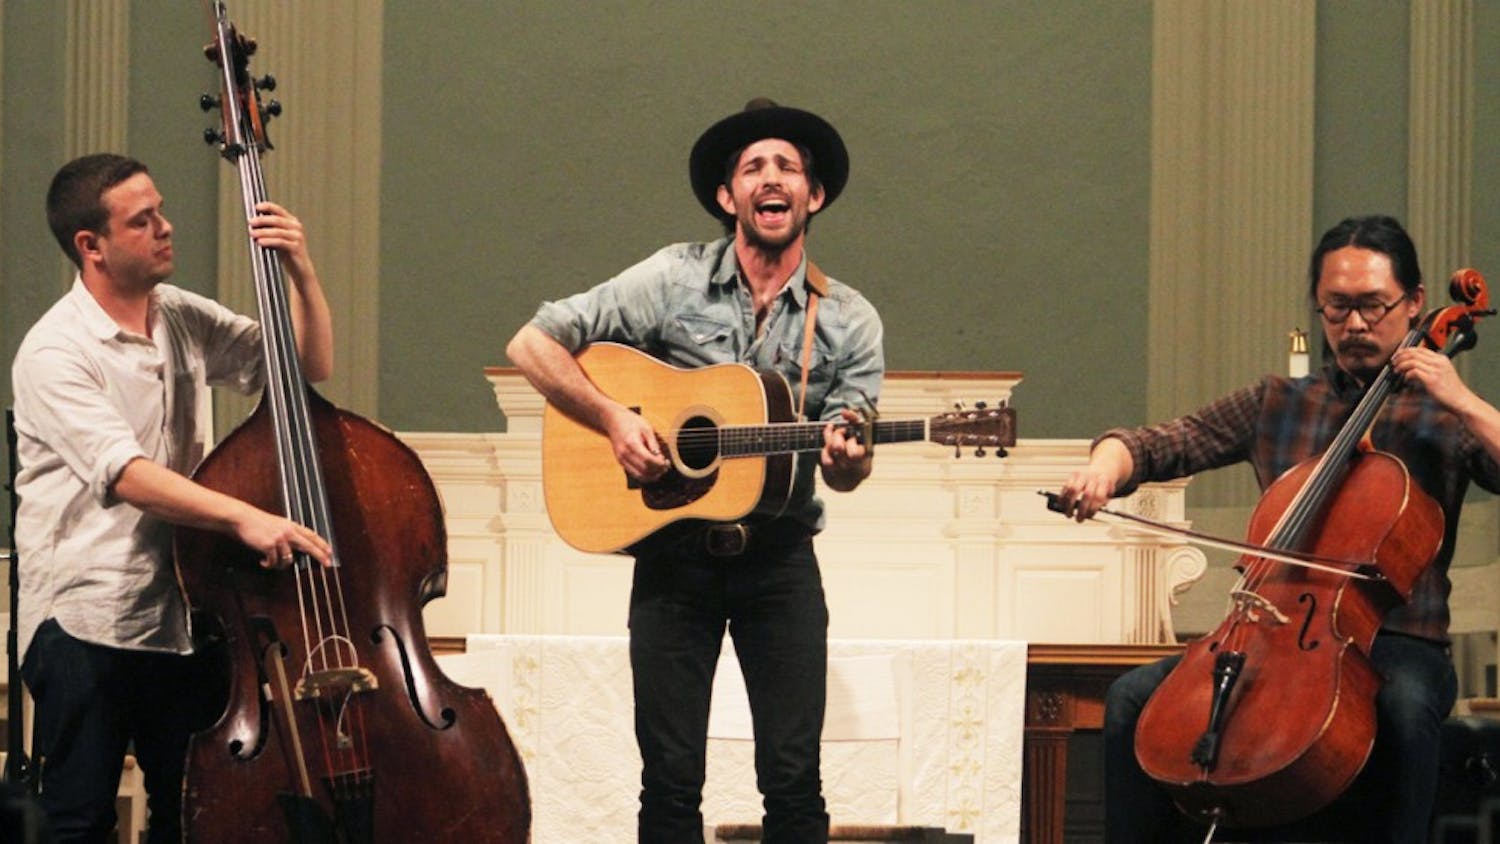 	Paul Defiglia, Scott Avett and Joe Kwon, from left to right, of the Avett Brothers perform at “MElodies” to benefit Musical Empowerment.